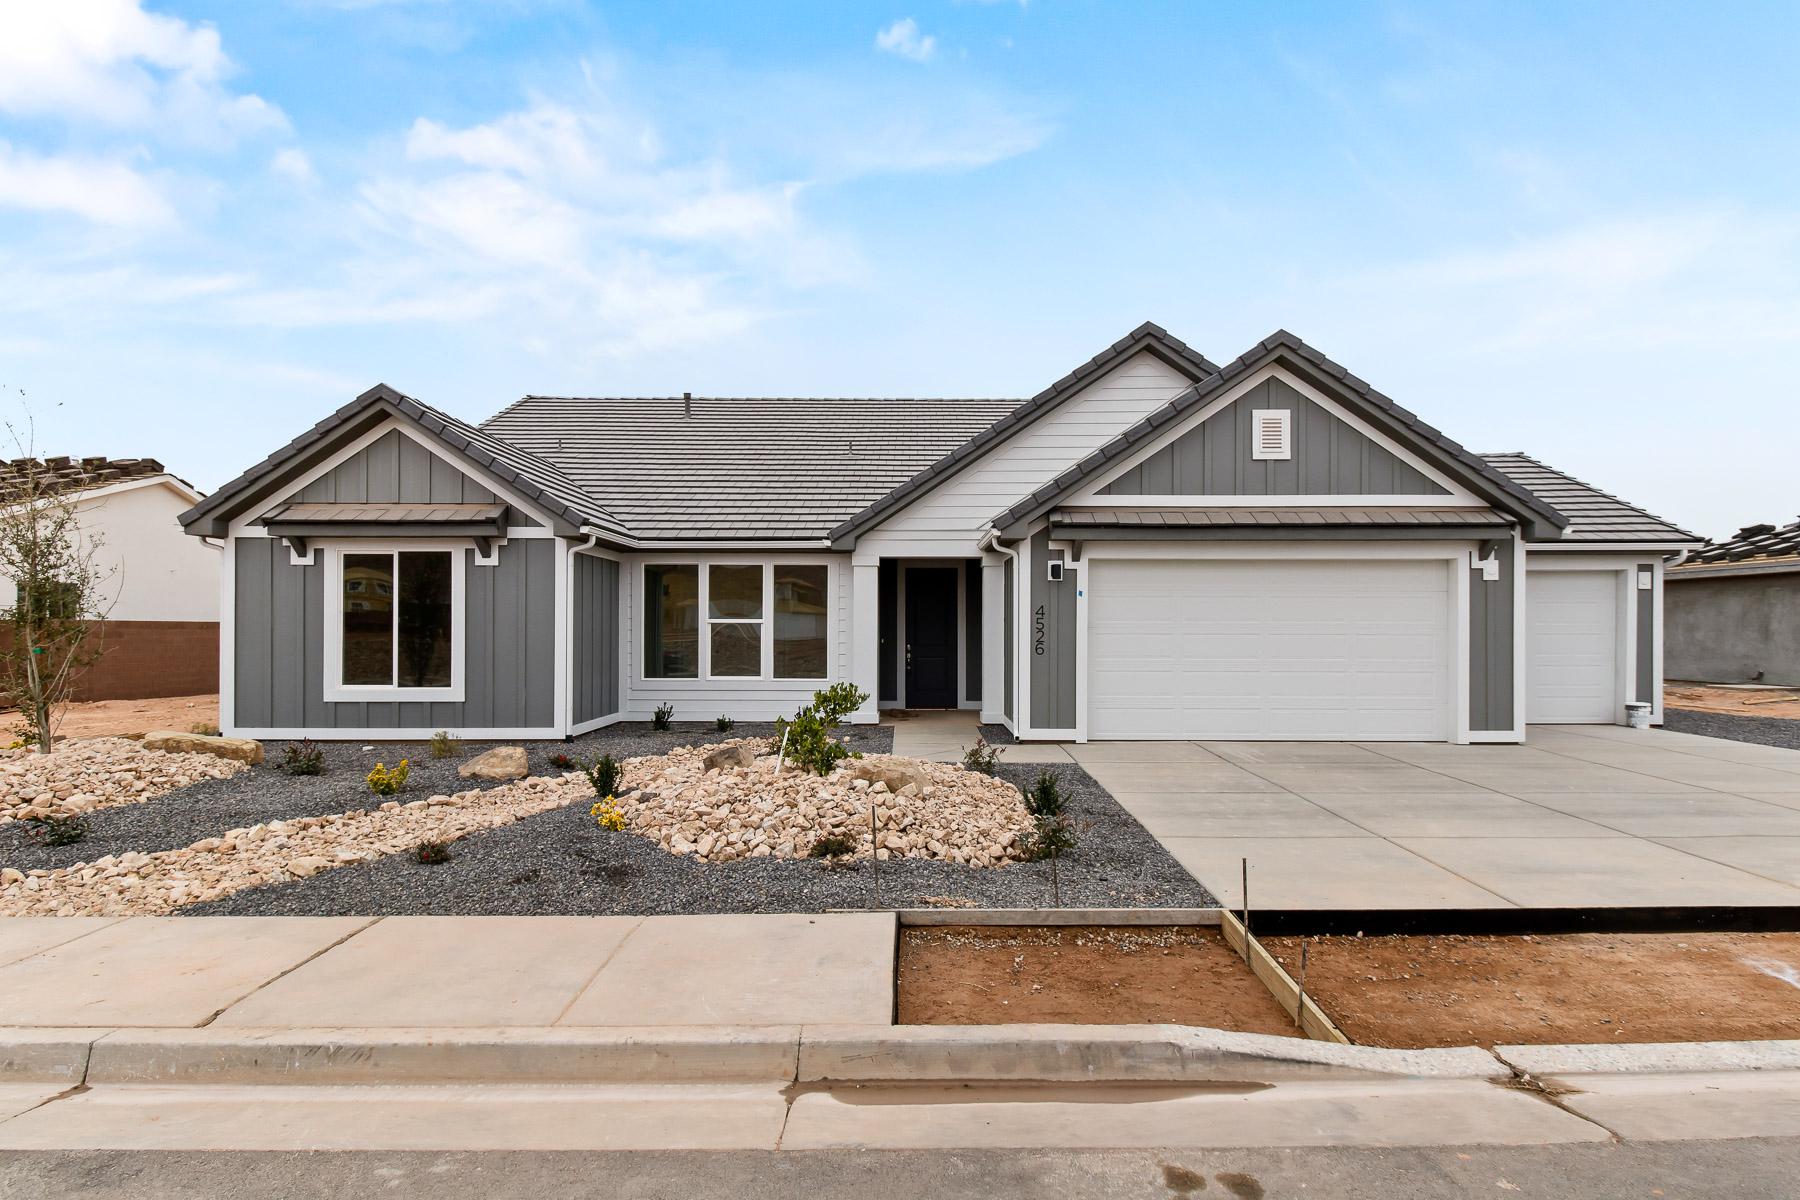 Exterior with Optional 3 Car Garage. 2,309sf New Home in St. George, UT